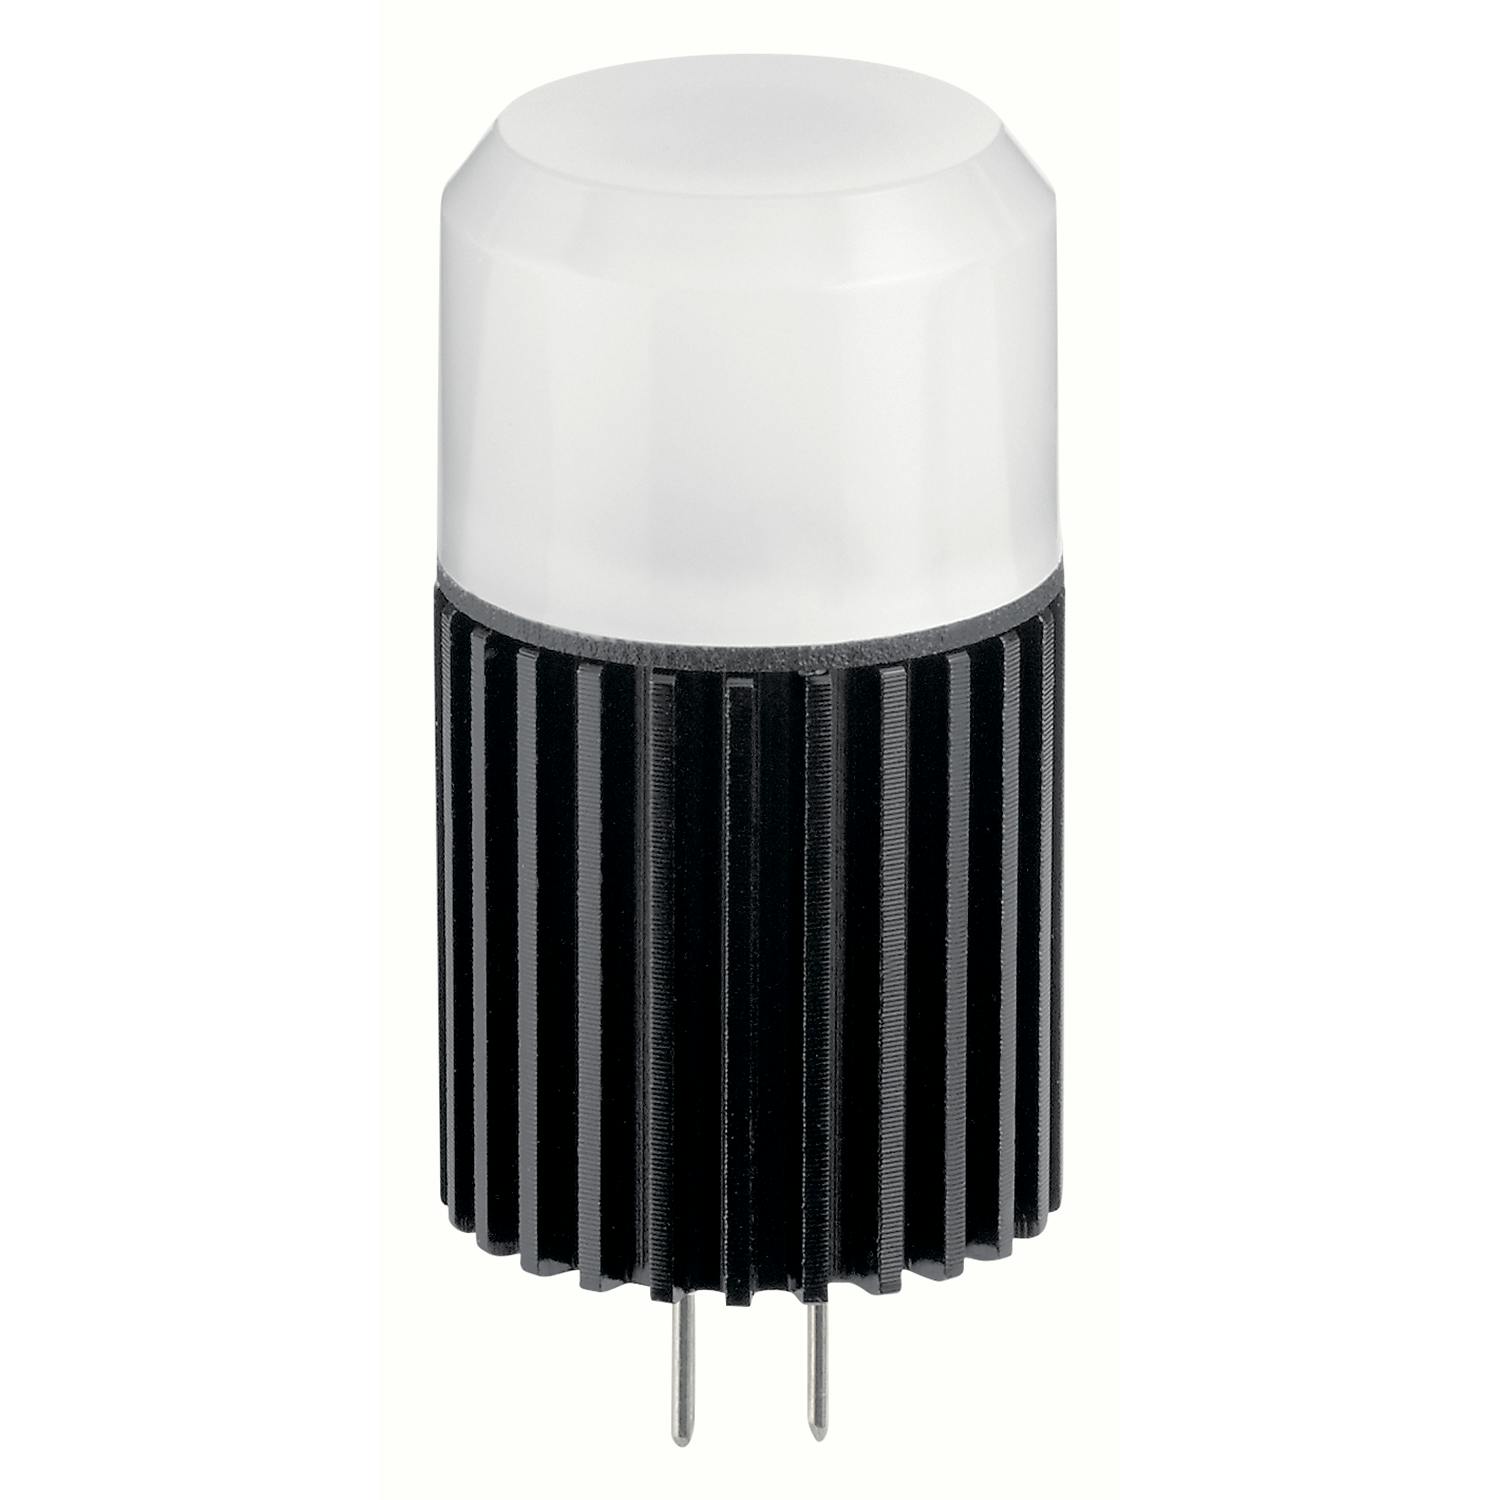 3000K LED T3 and G4 Bi-Pin 2W 300 Degree on a white background